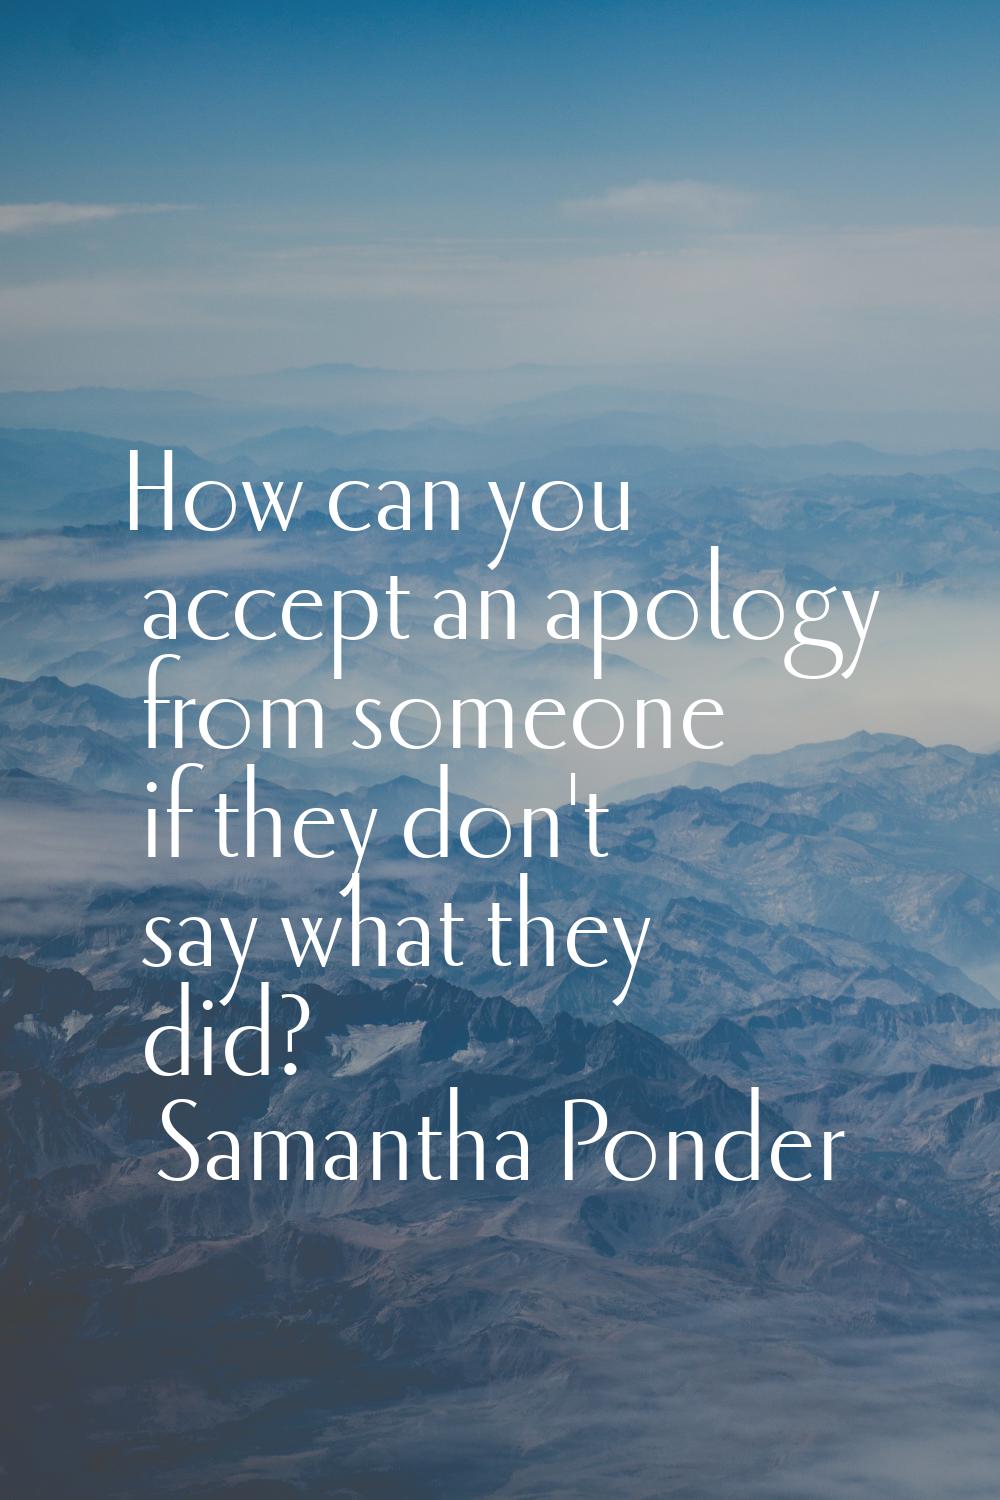 How can you accept an apology from someone if they don't say what they did?